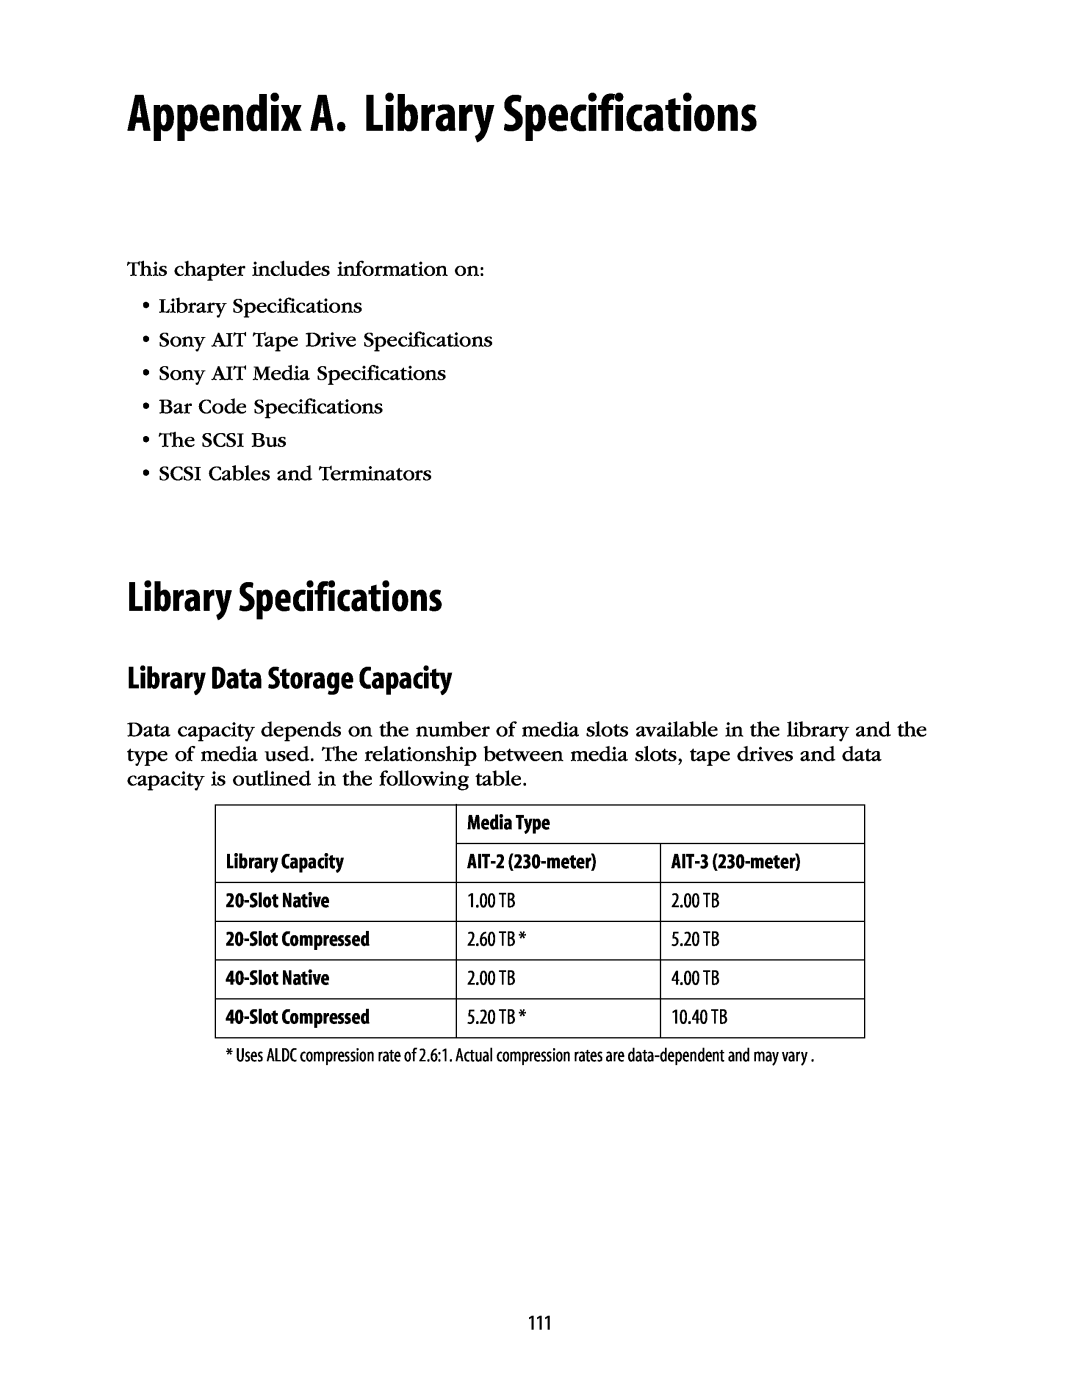 Spectra Logic 10000 manual Appendix A. Library Specifications, Library Data Storage Capacity 